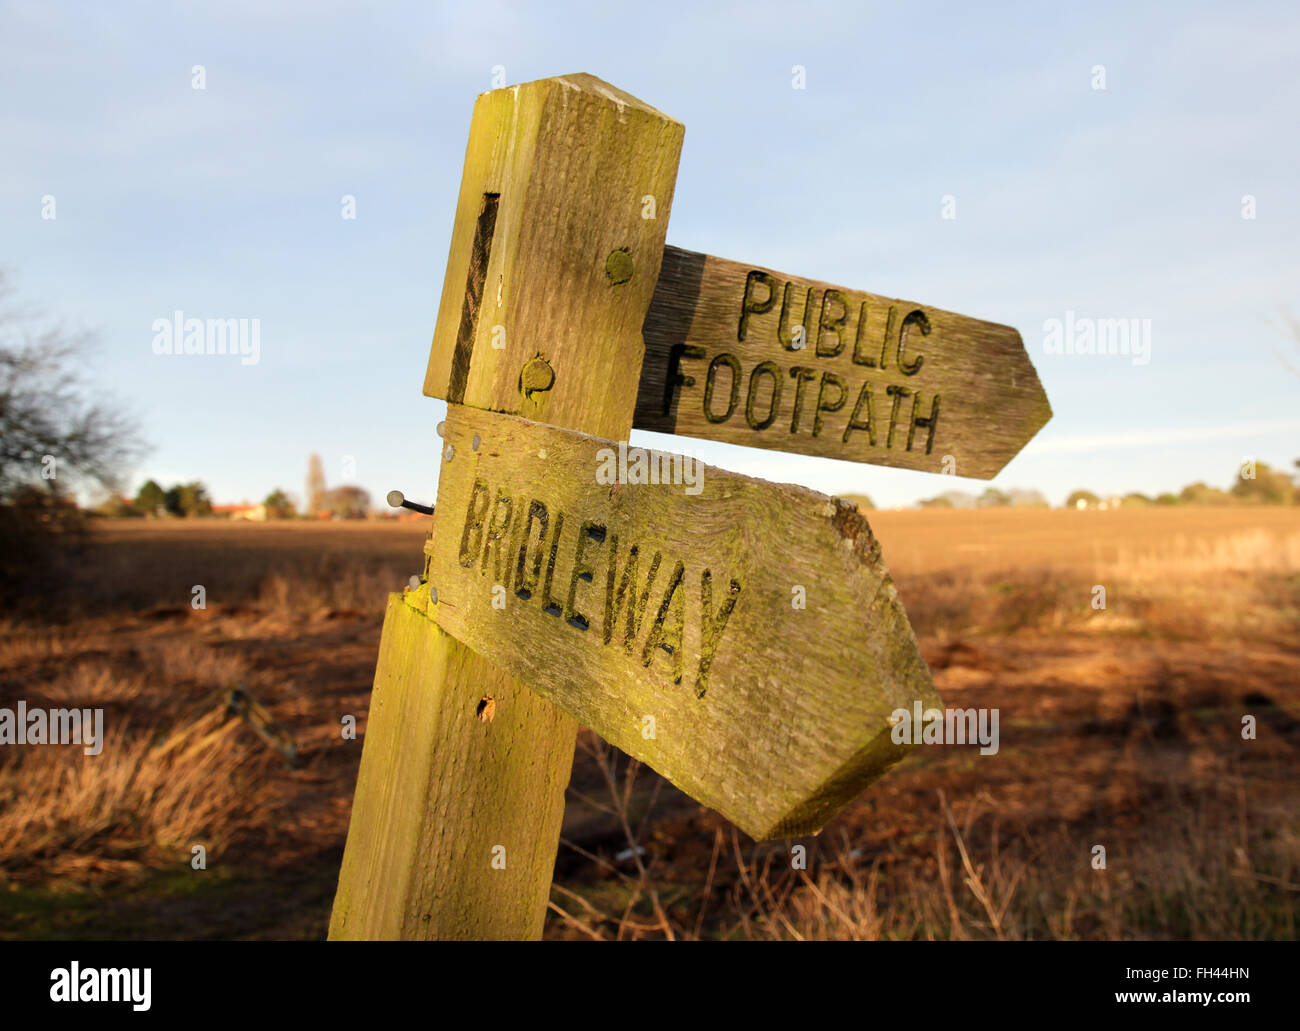 bridleway and public footpath sign Stock Photo